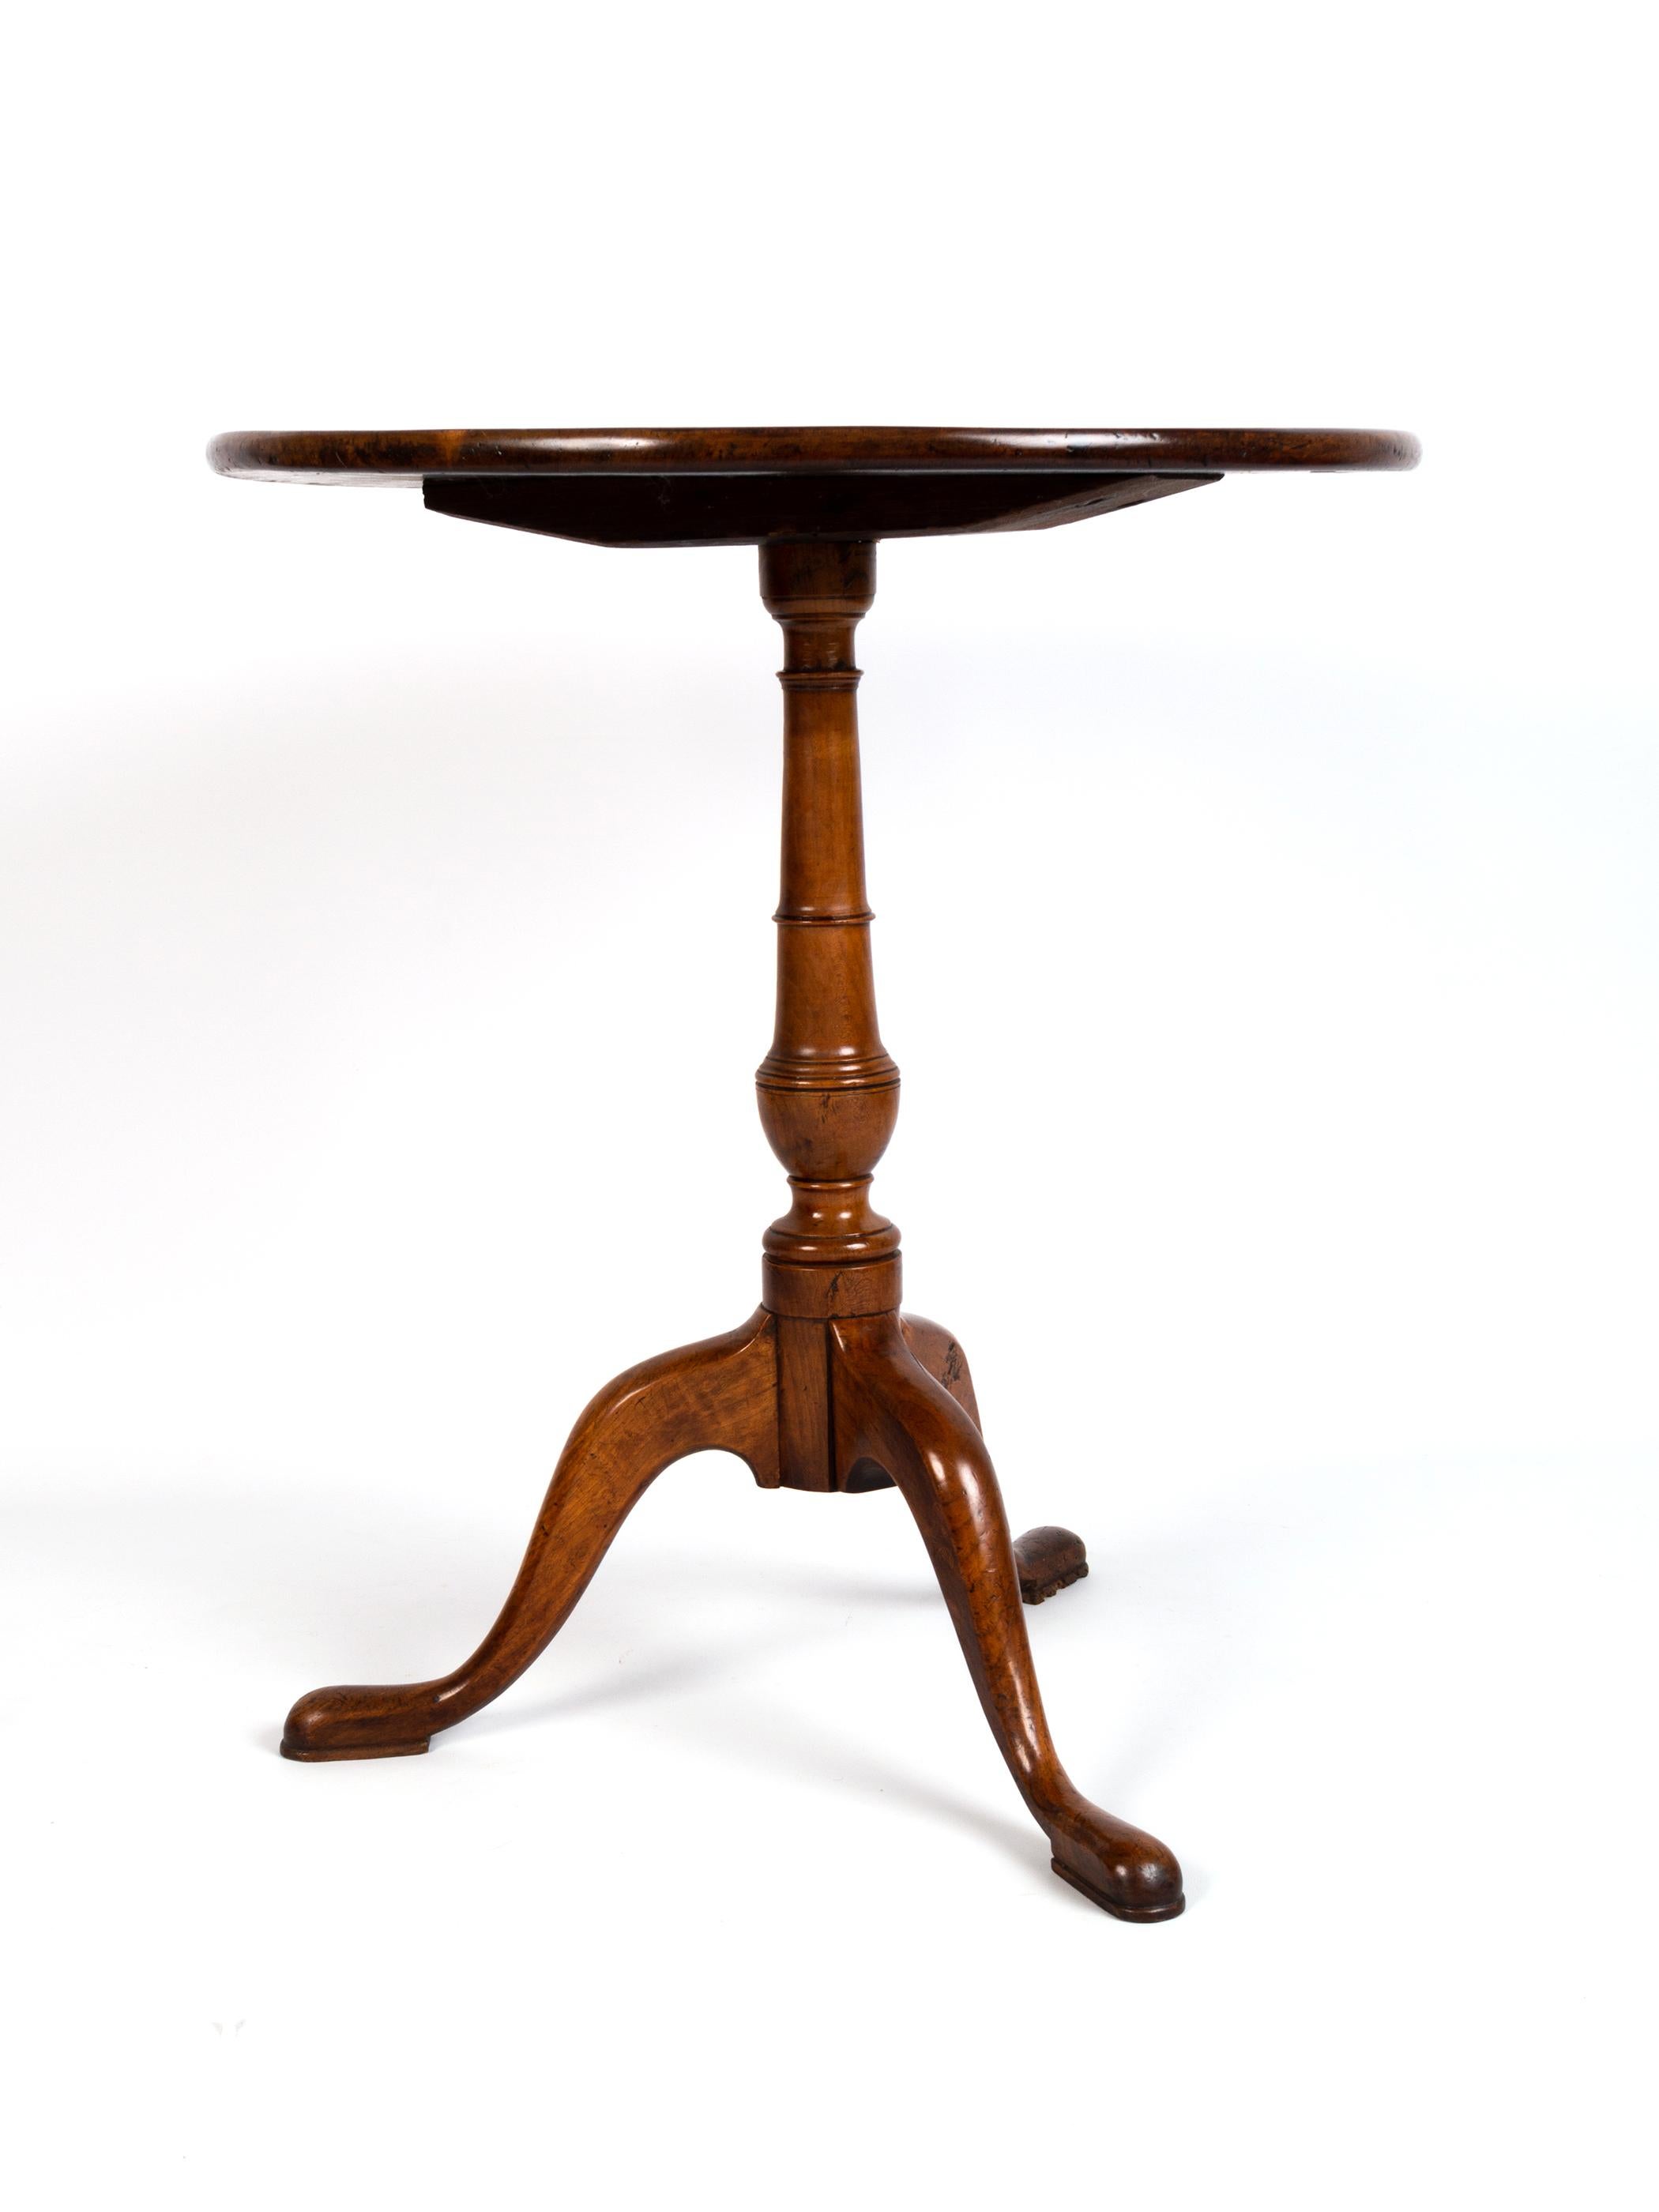 An English 18th century George III Mahogany tripod table 
England, C.1790. 
In excellent condition commensurate of age.